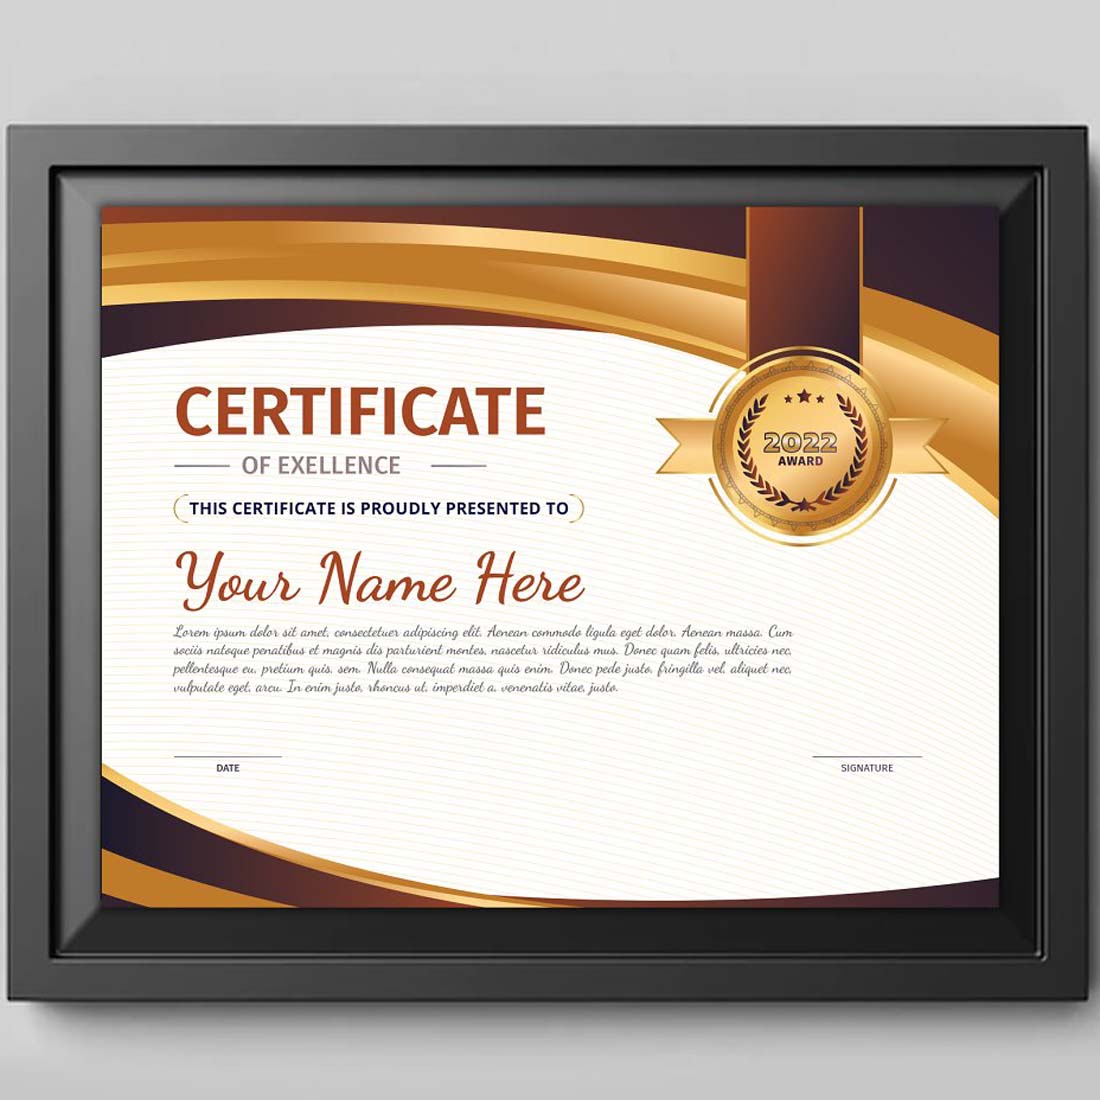 Professional Certificate Design preview image.